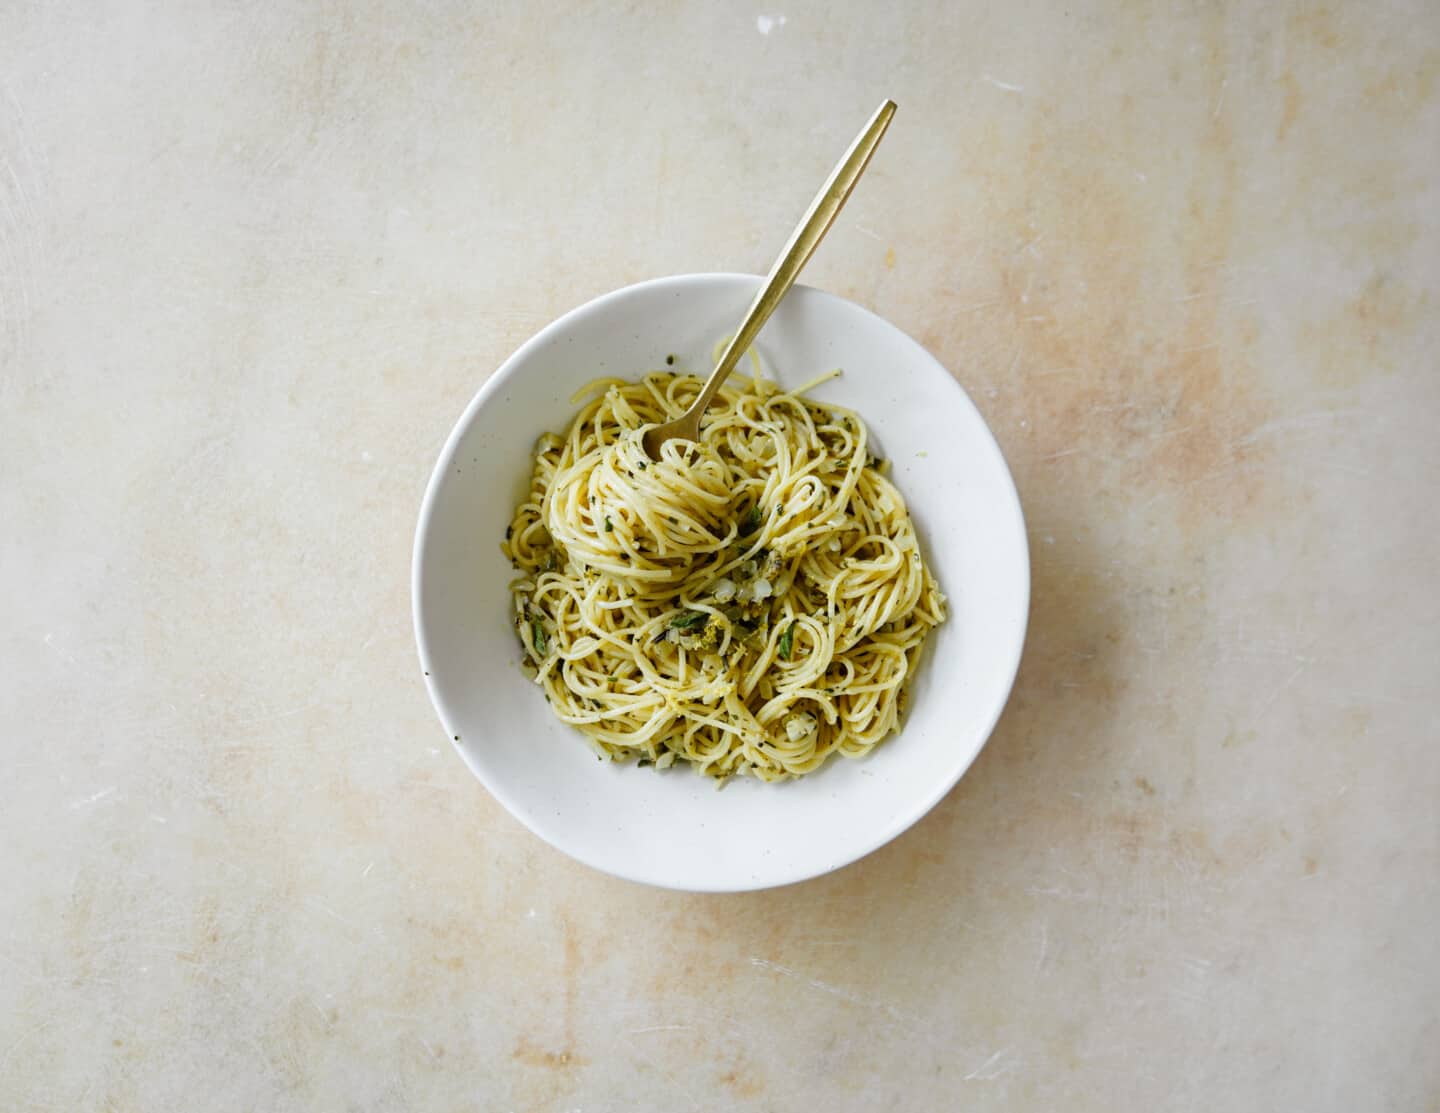 garlic butter pasta in a bowl - ready to eat